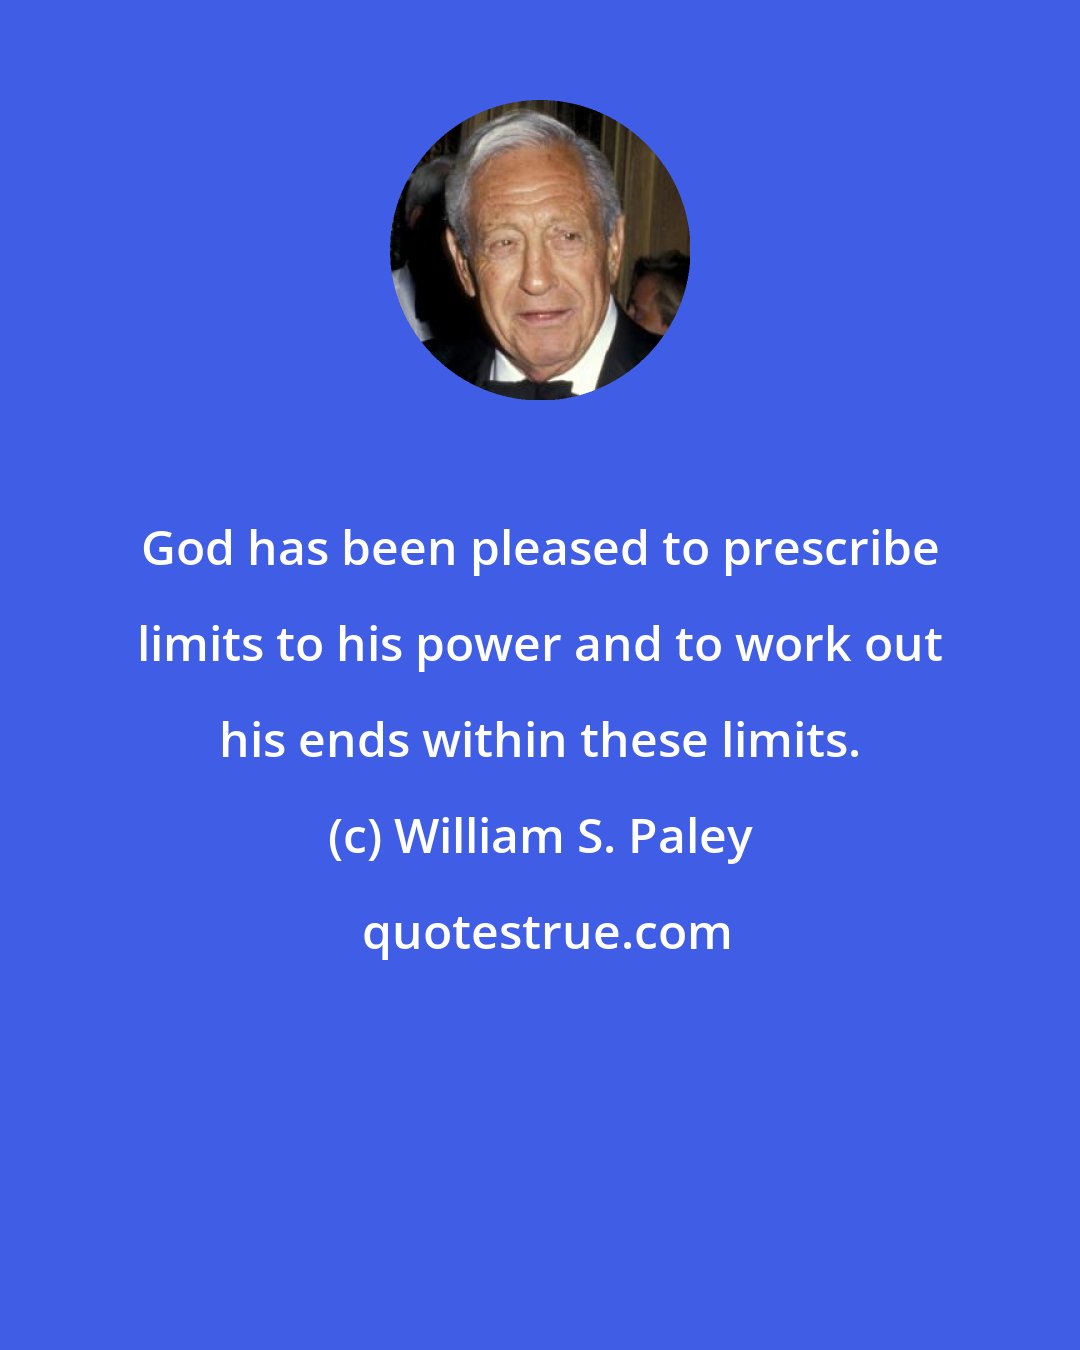 William S. Paley: God has been pleased to prescribe limits to his power and to work out his ends within these limits.